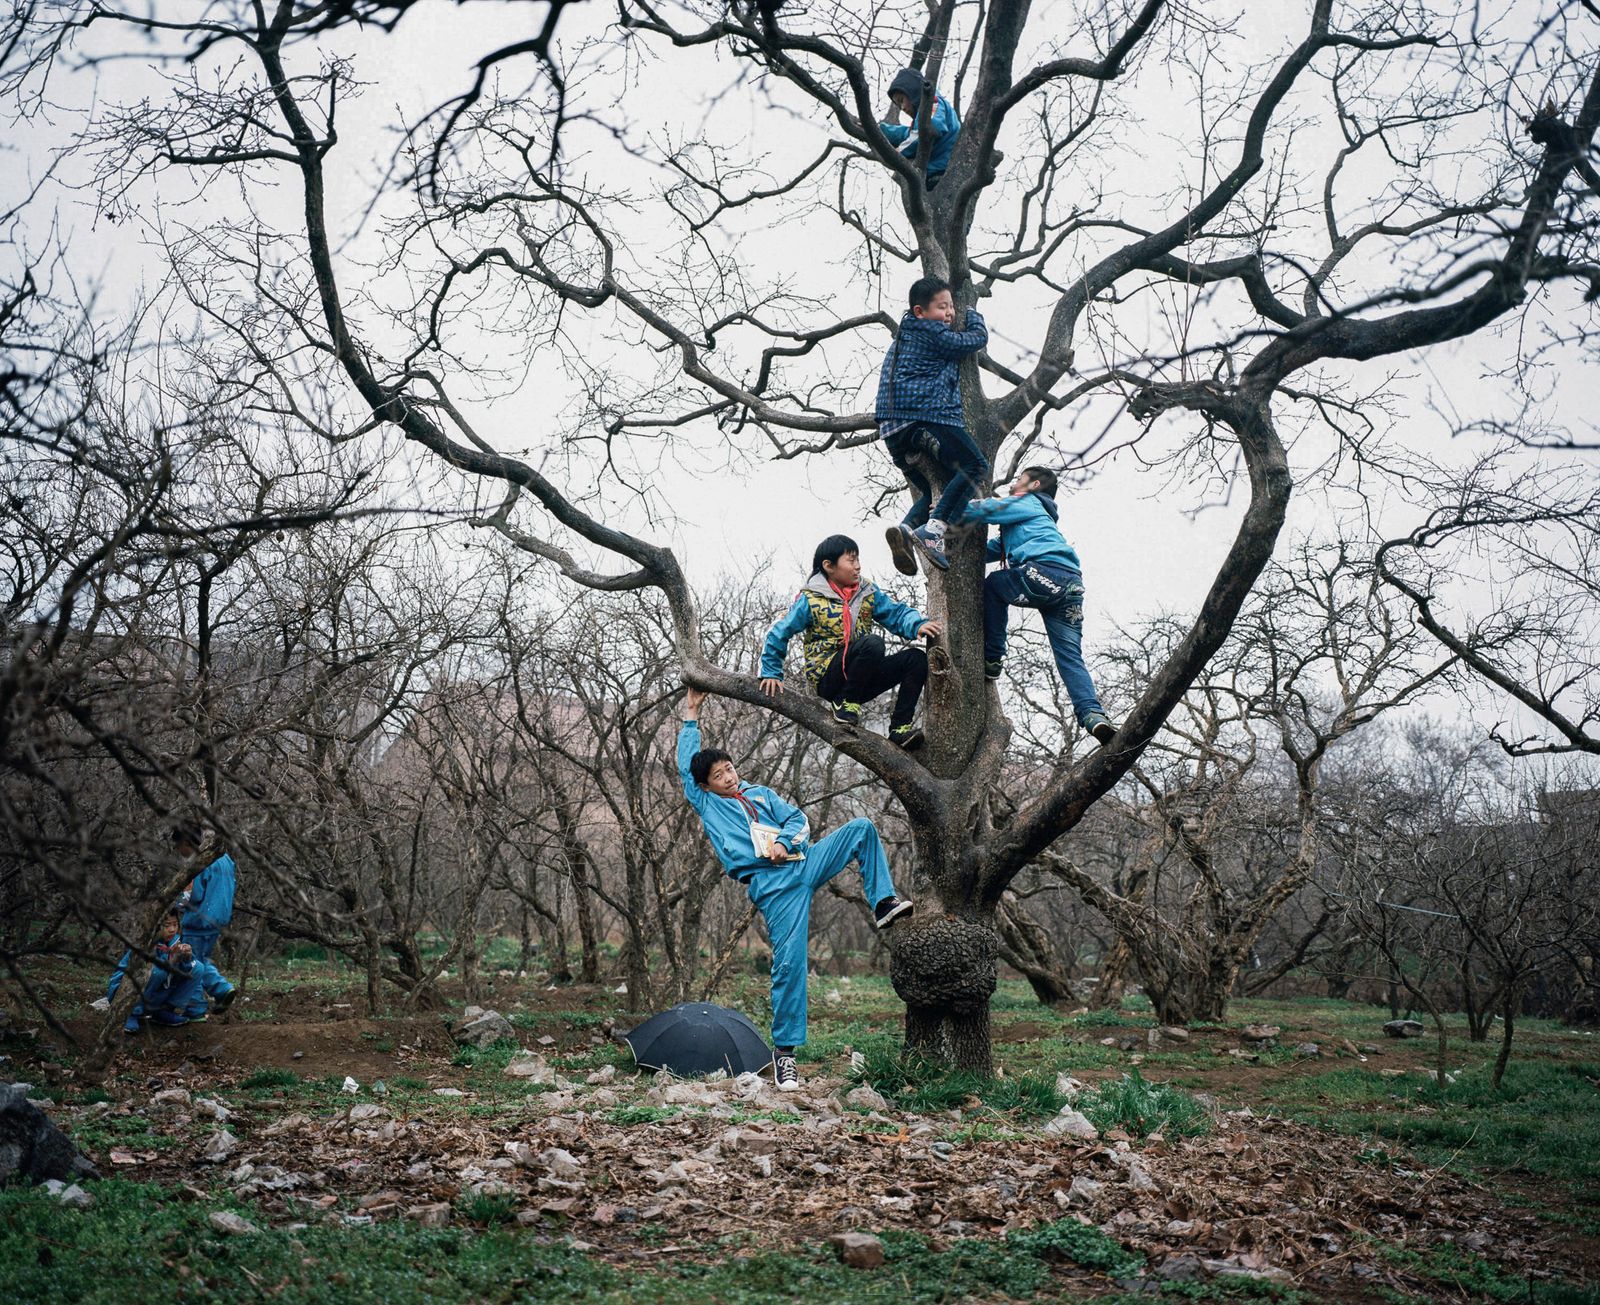 © Pan Wang - 10.After school, the children climbed on the persimmon tree to play